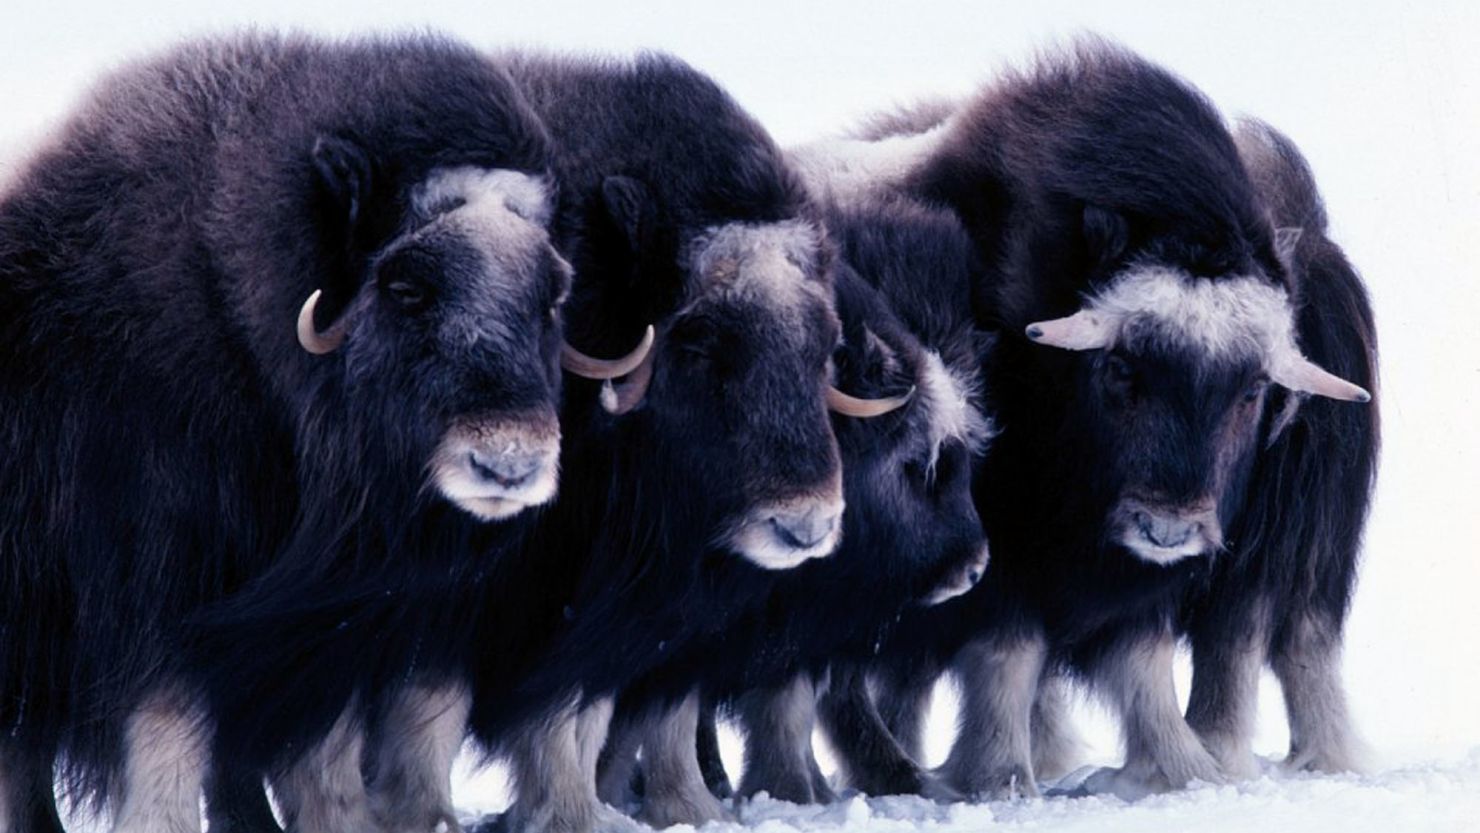 Rebecca Rimel and Dale Hall say animals like these Arctic muskoxen can be protected under a new oil and gas leasing plan.